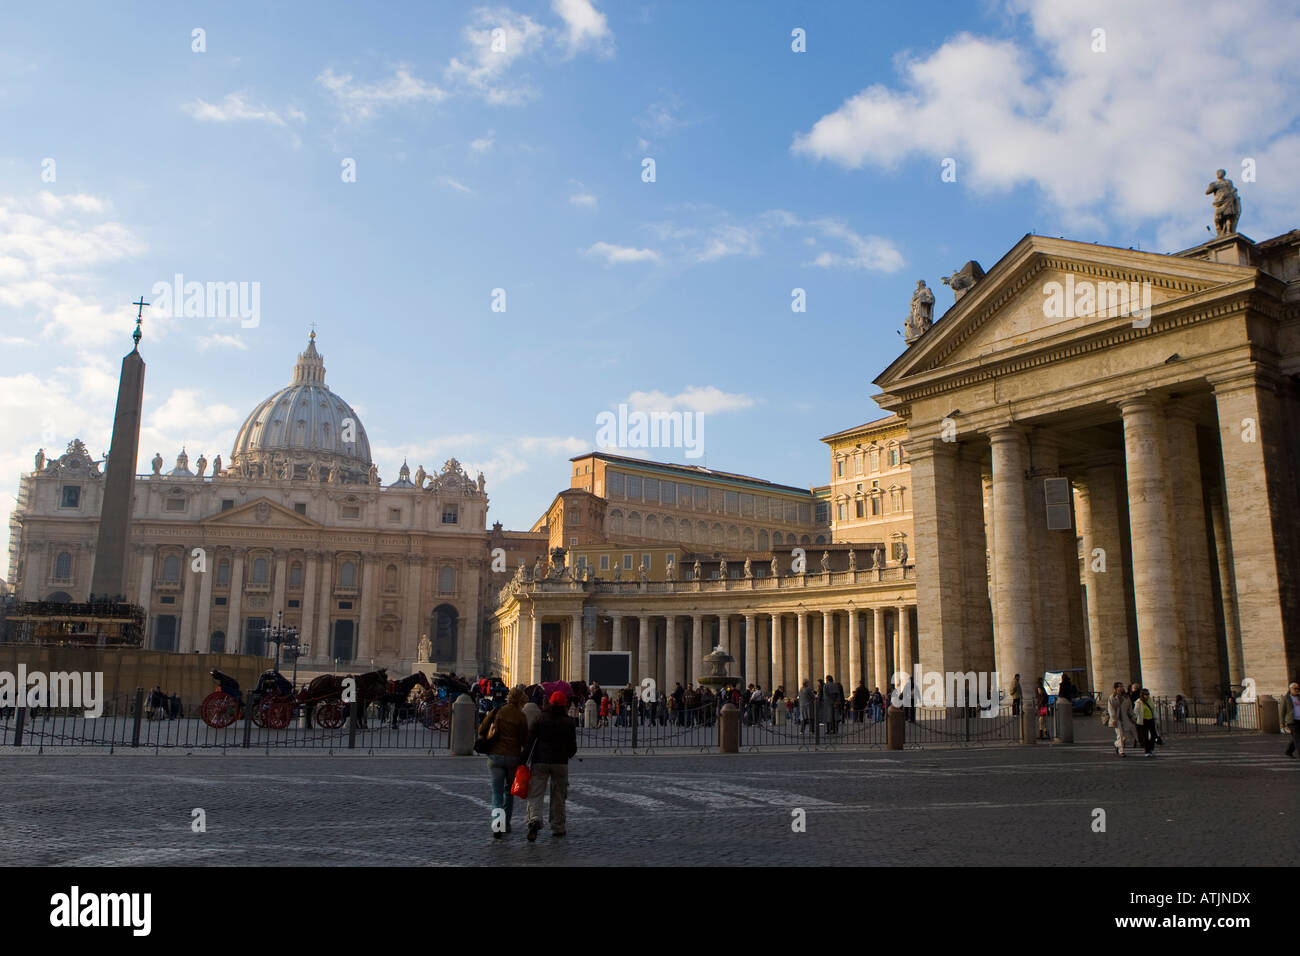 St. Peter's Square / Piazza San Pietro, Vatican City, The Vatican, Holy See, Rome / Roma, Italy / Italia Stock Photo